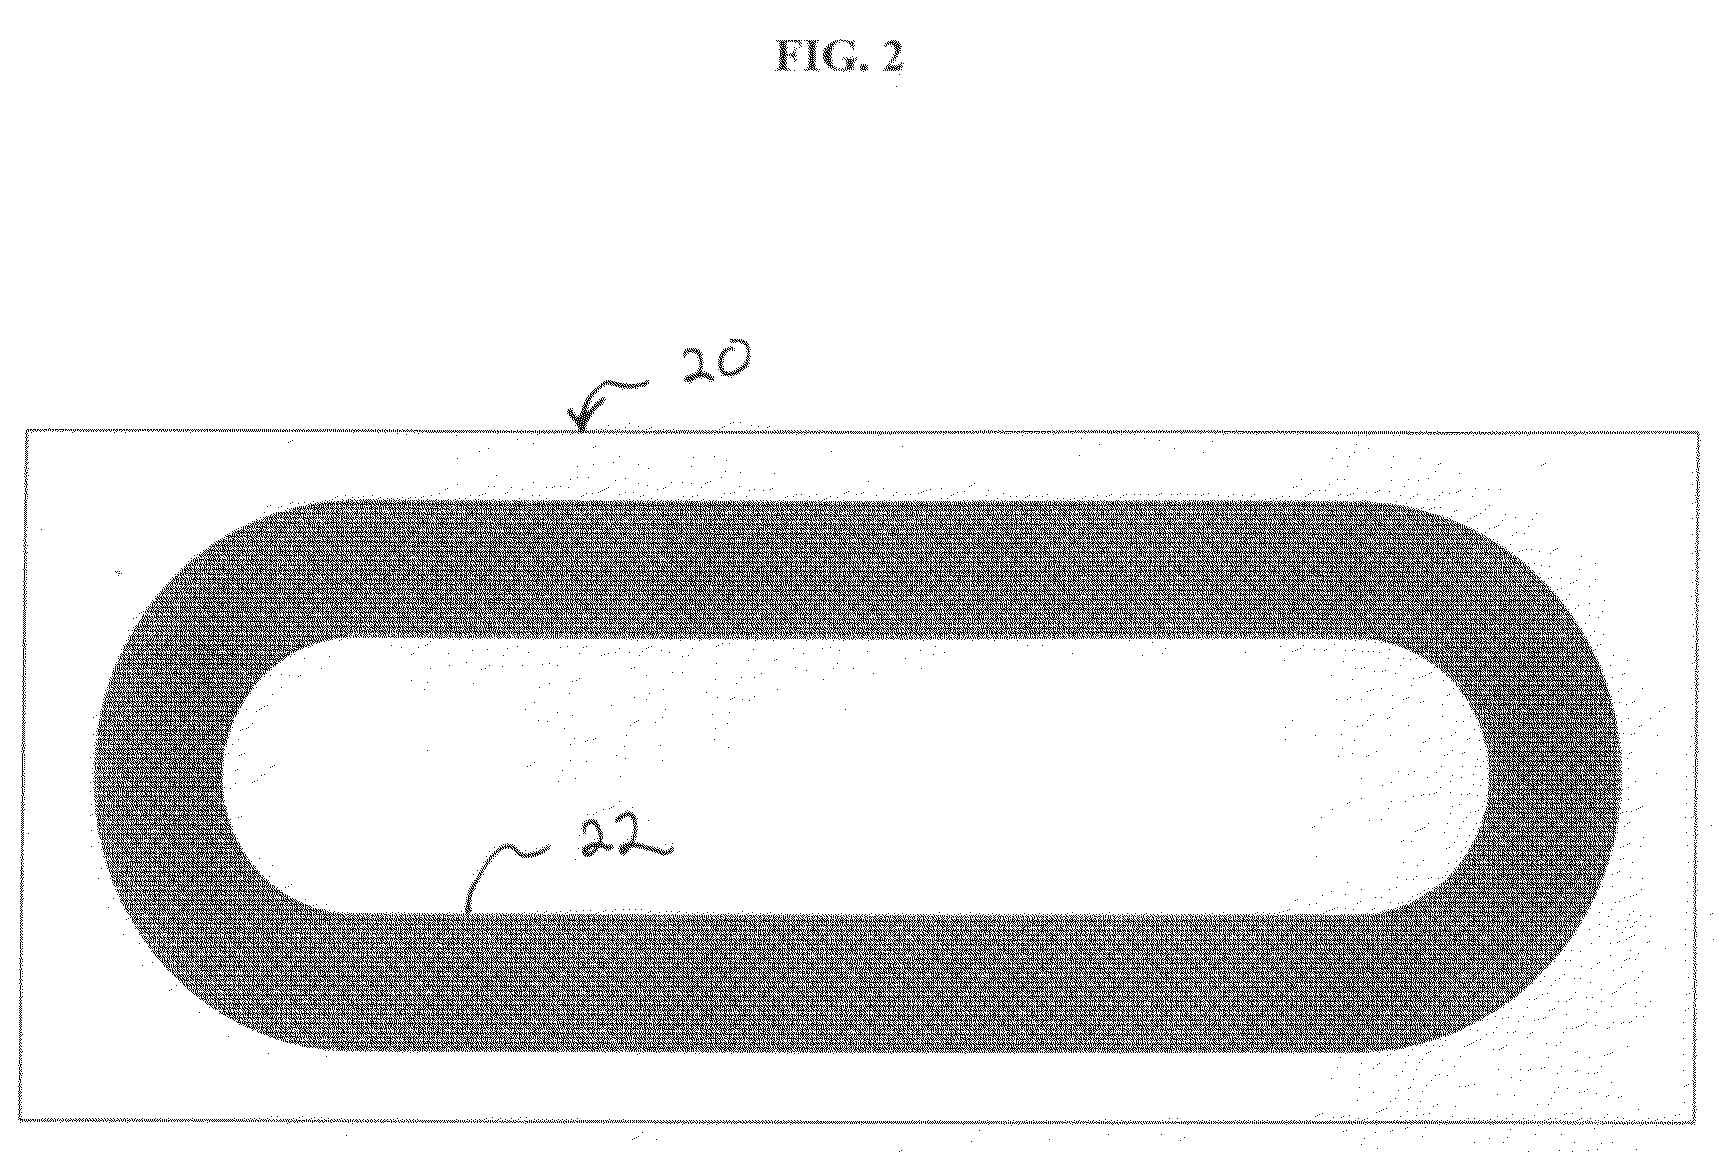 Method for making composite sputtering targets and the tartets made in accordance with the method